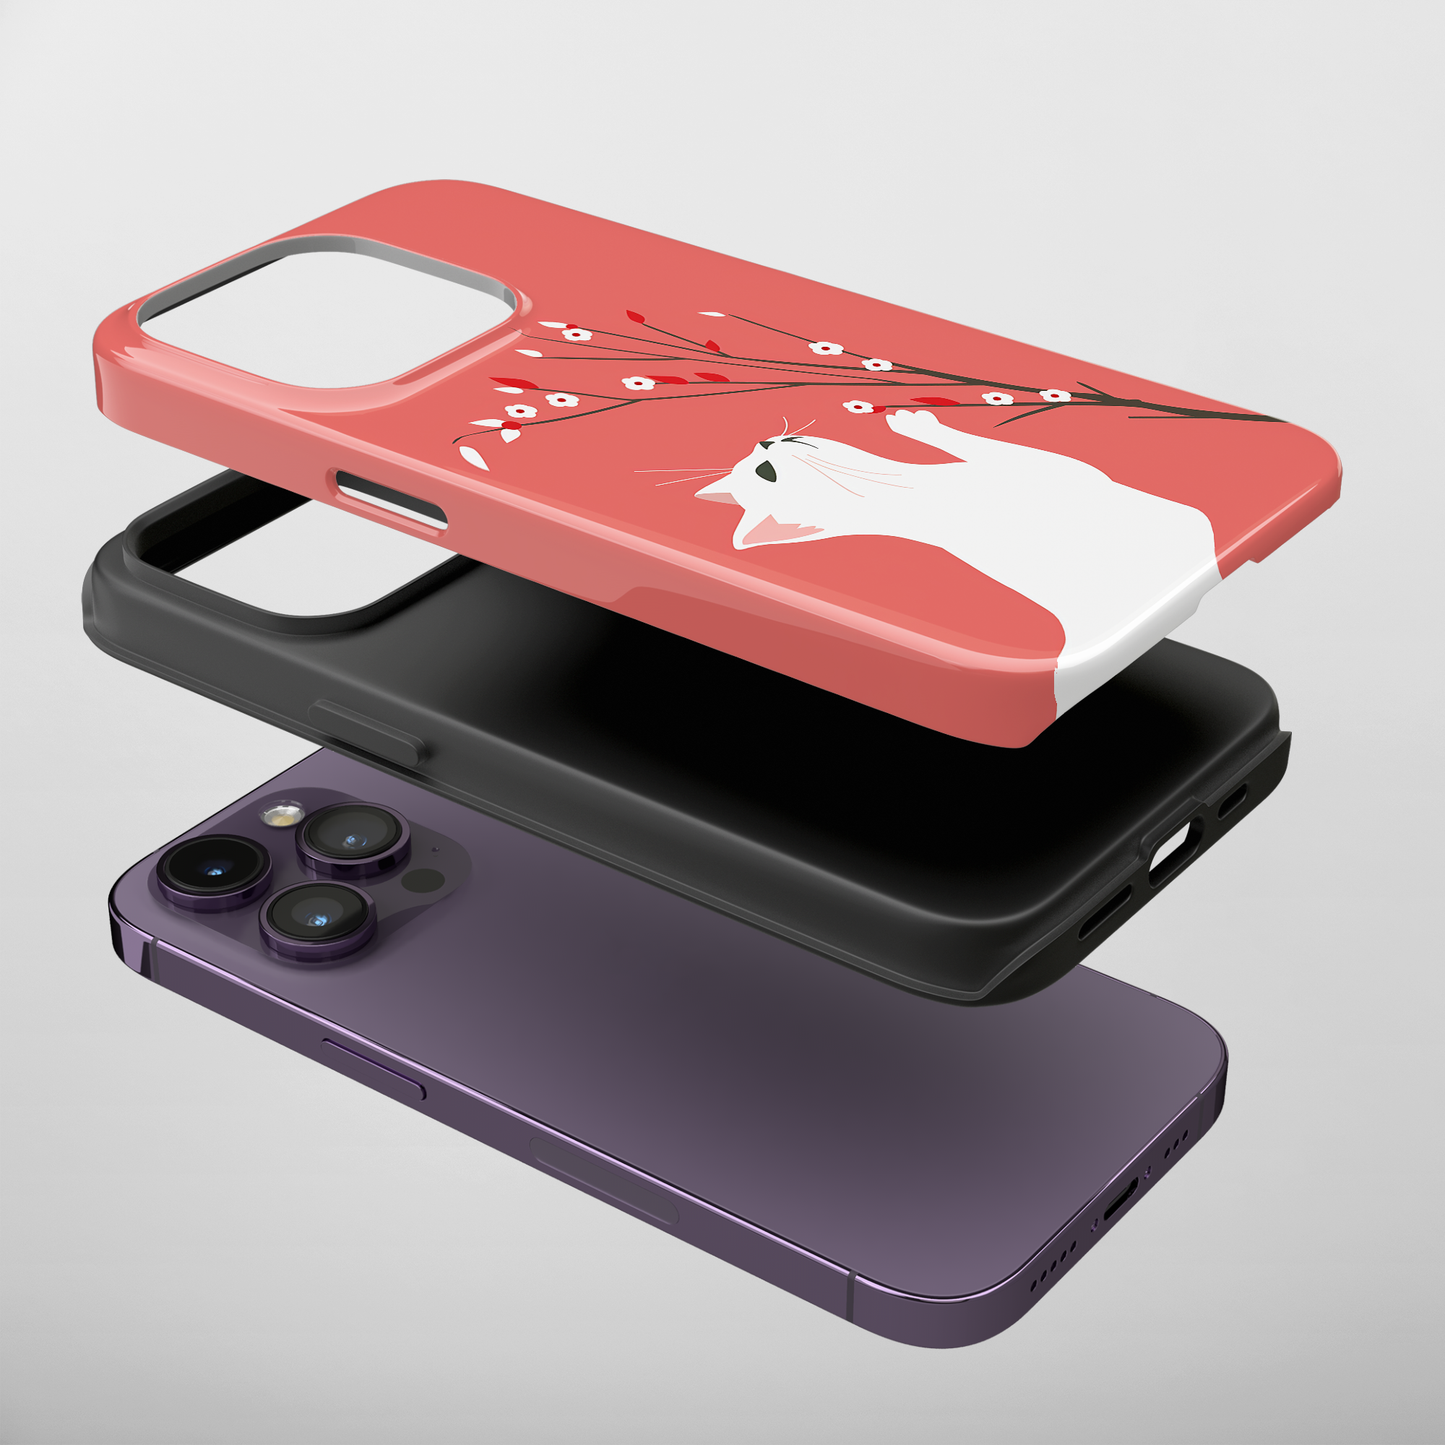 Side view of the Floral Feline iPhone Case, showing button accessibility and case thickness.